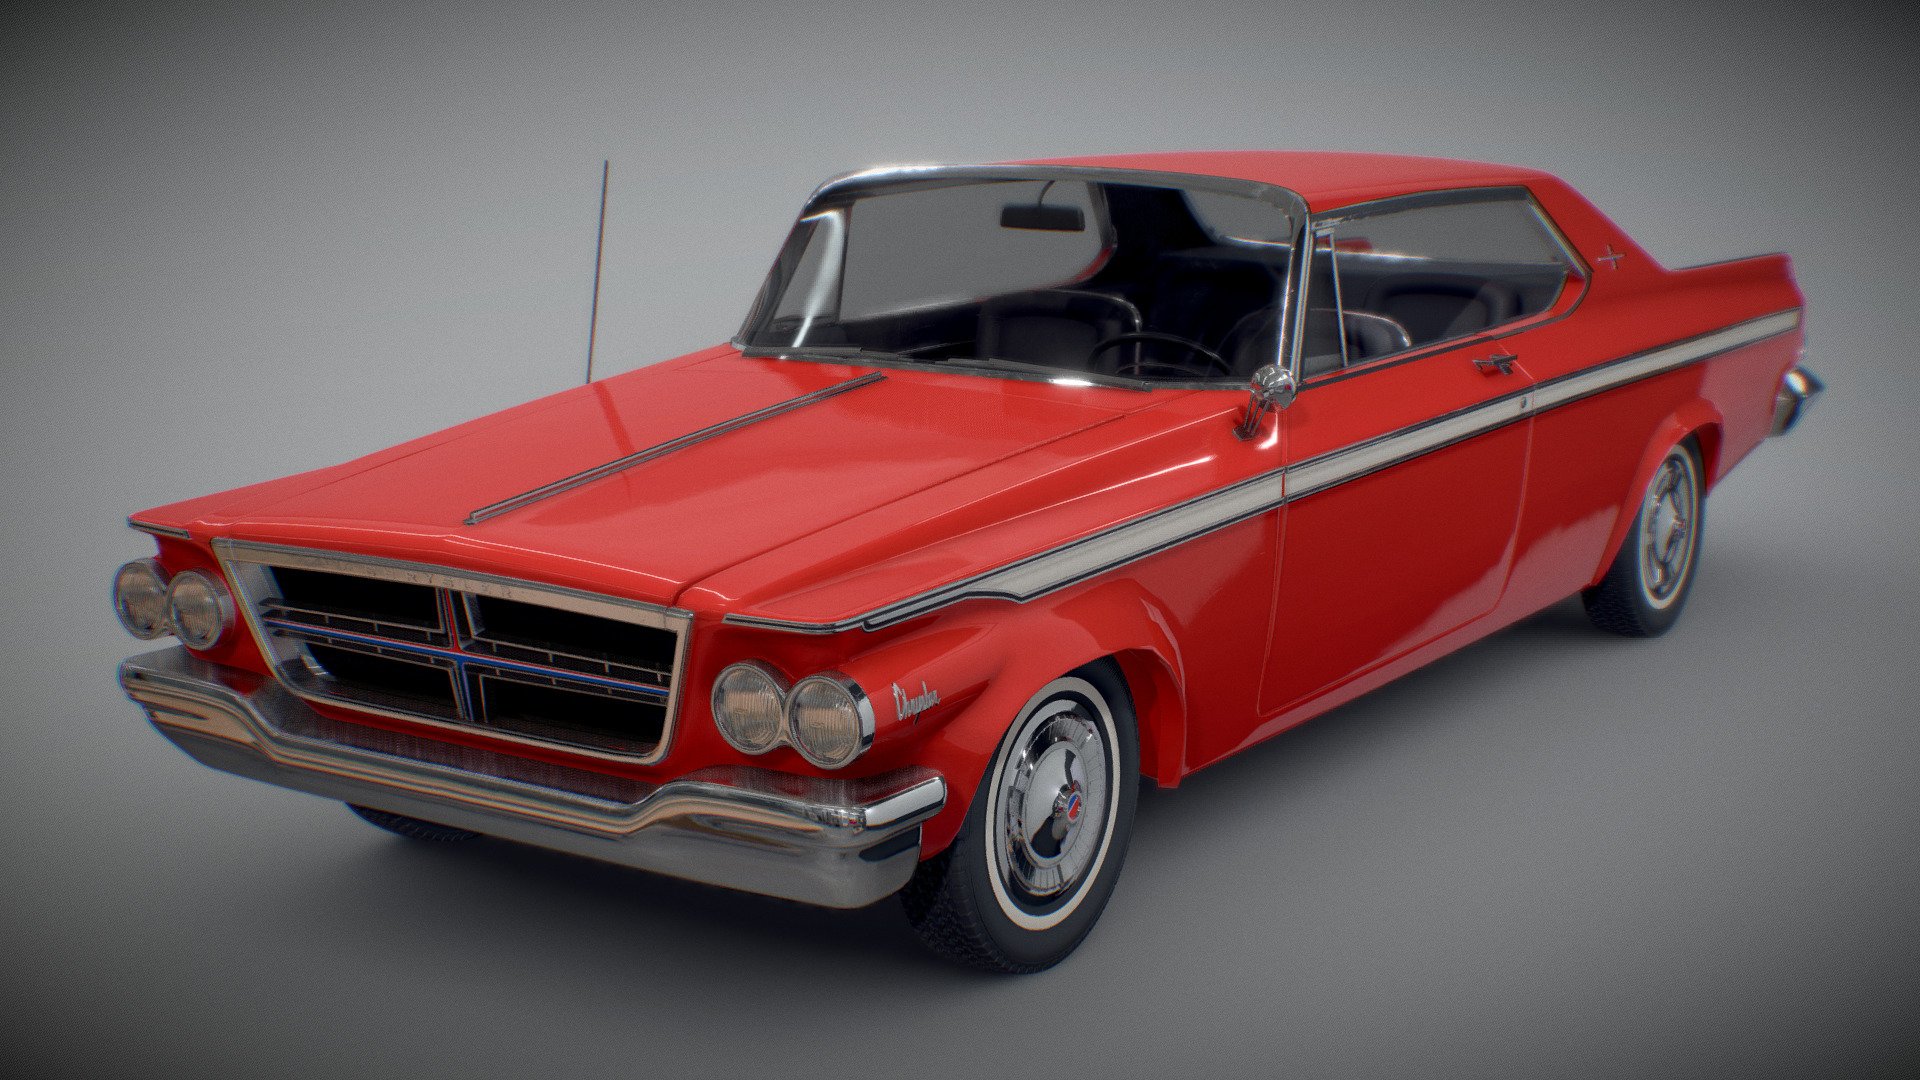 3D Model of a Chrysler 300k non convertable 1964

car model with a modelled interior and undercarriage 3d model